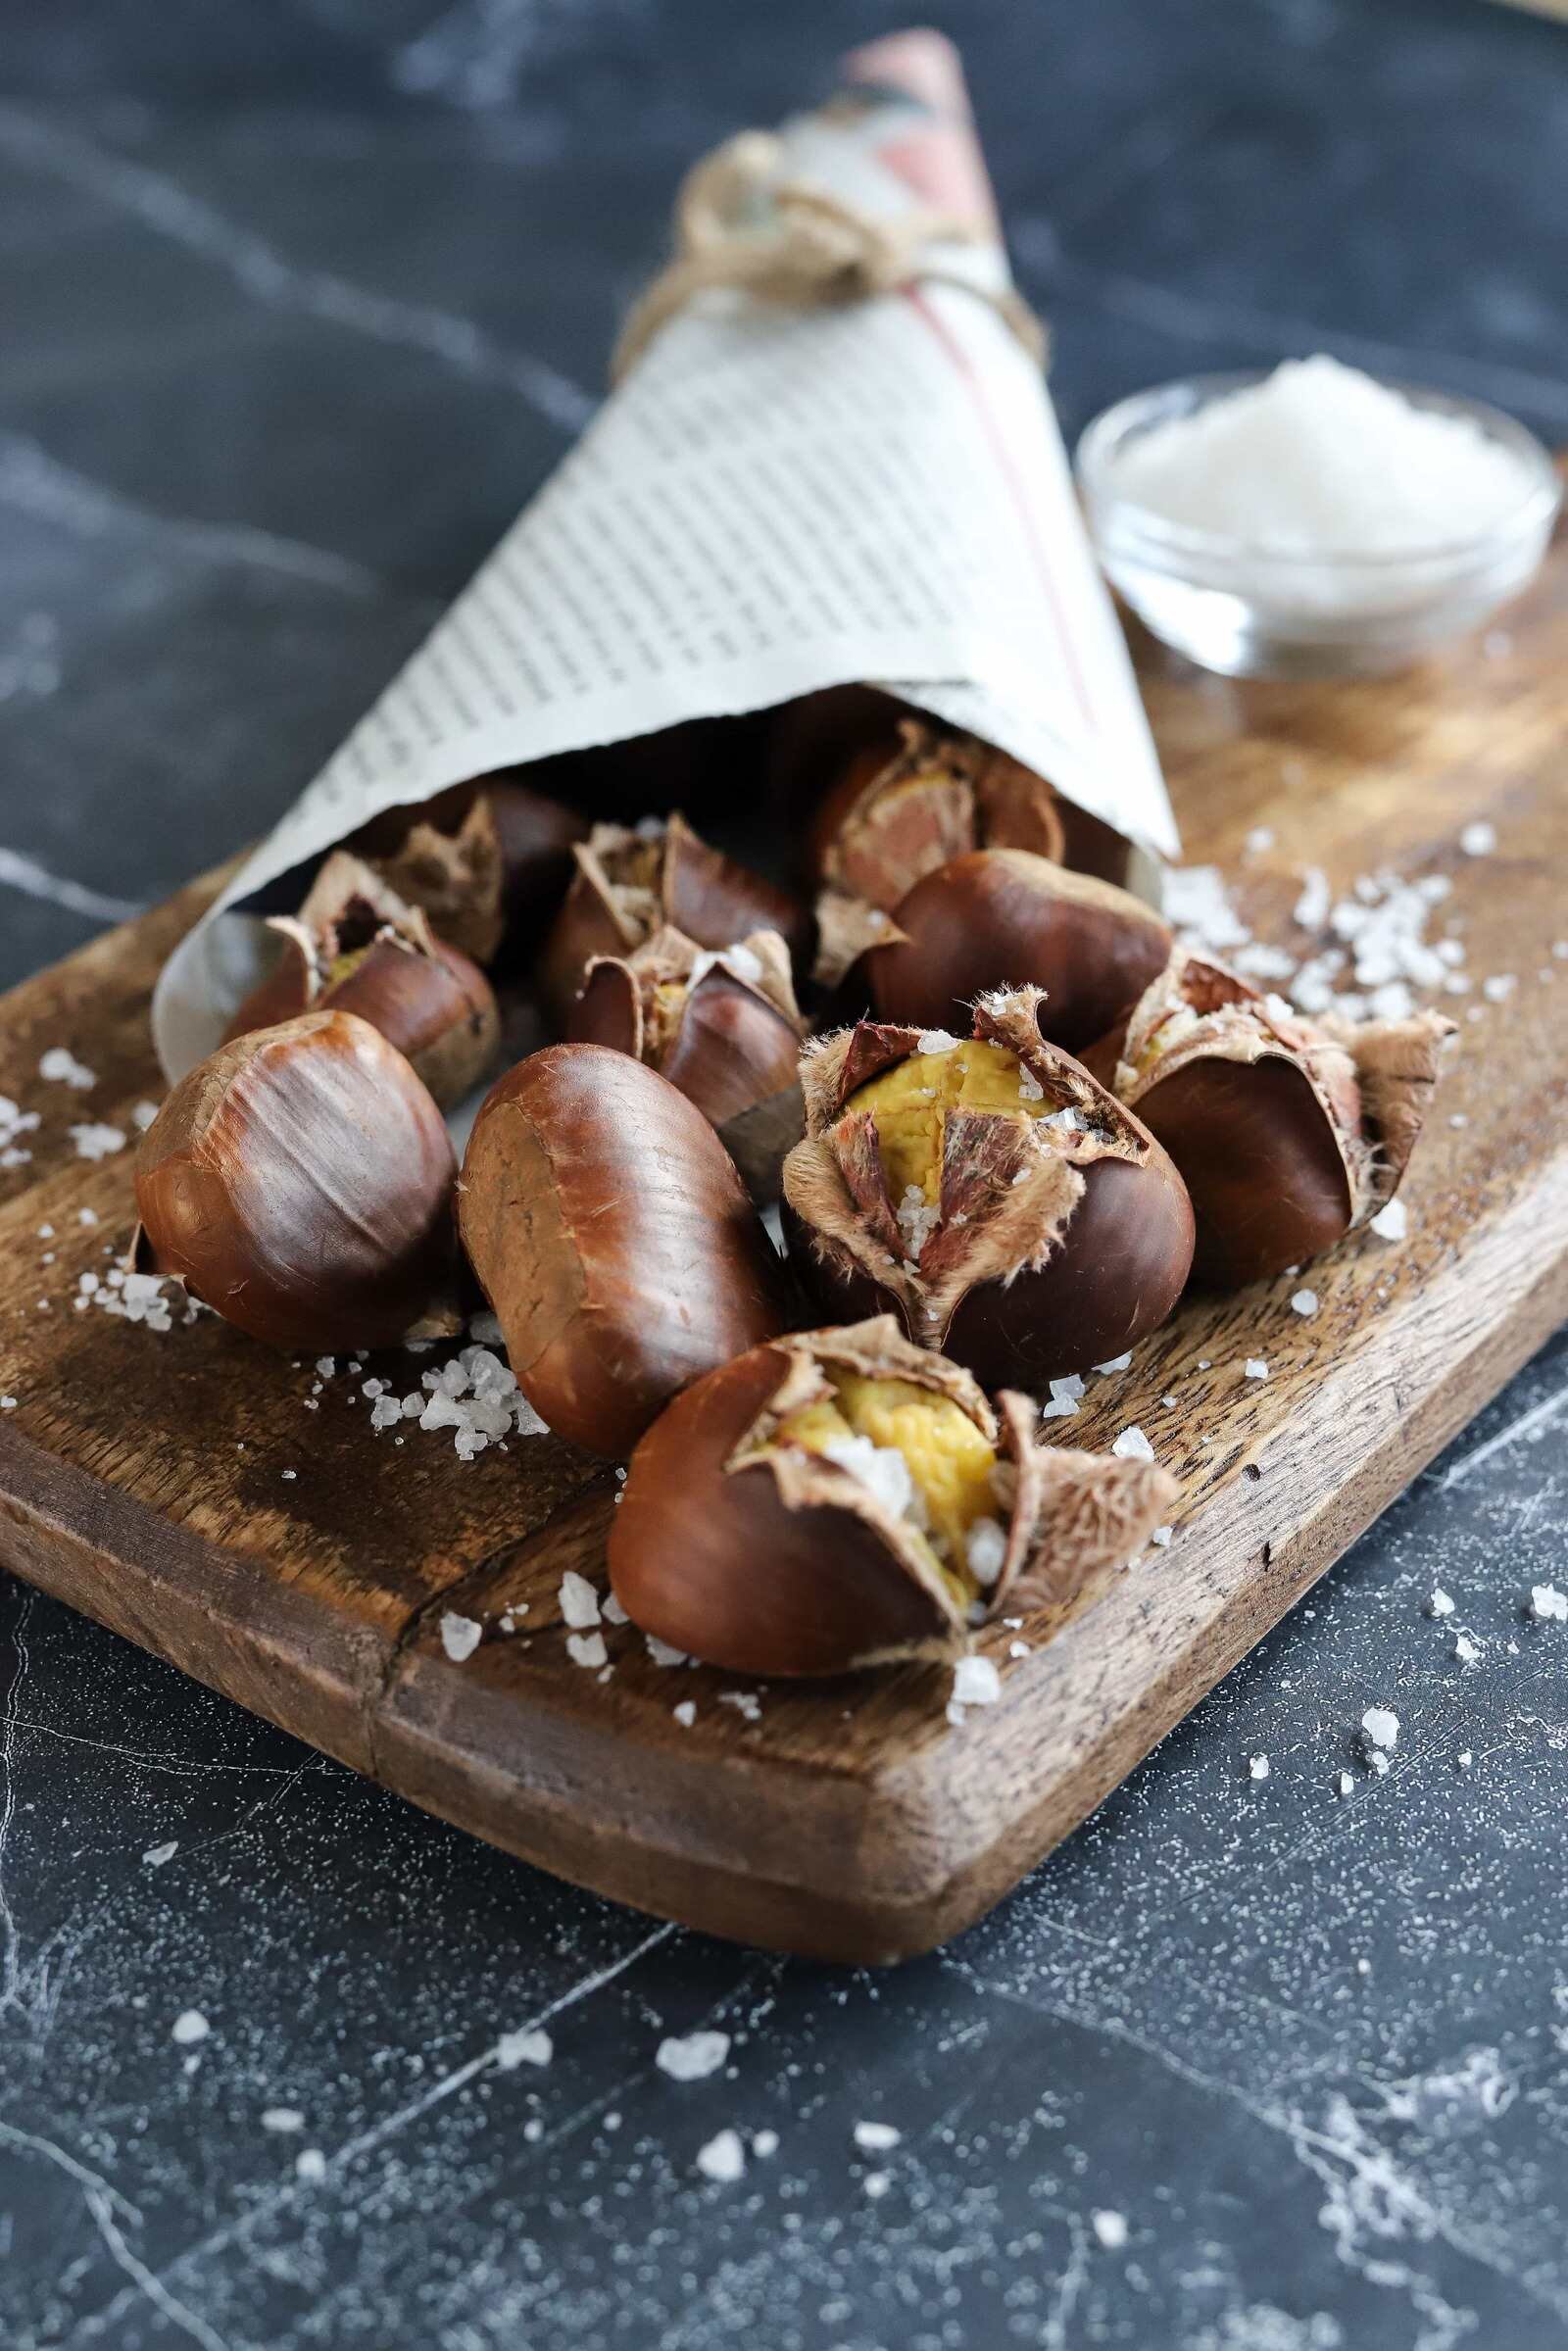 Oven-roasted chestnuts